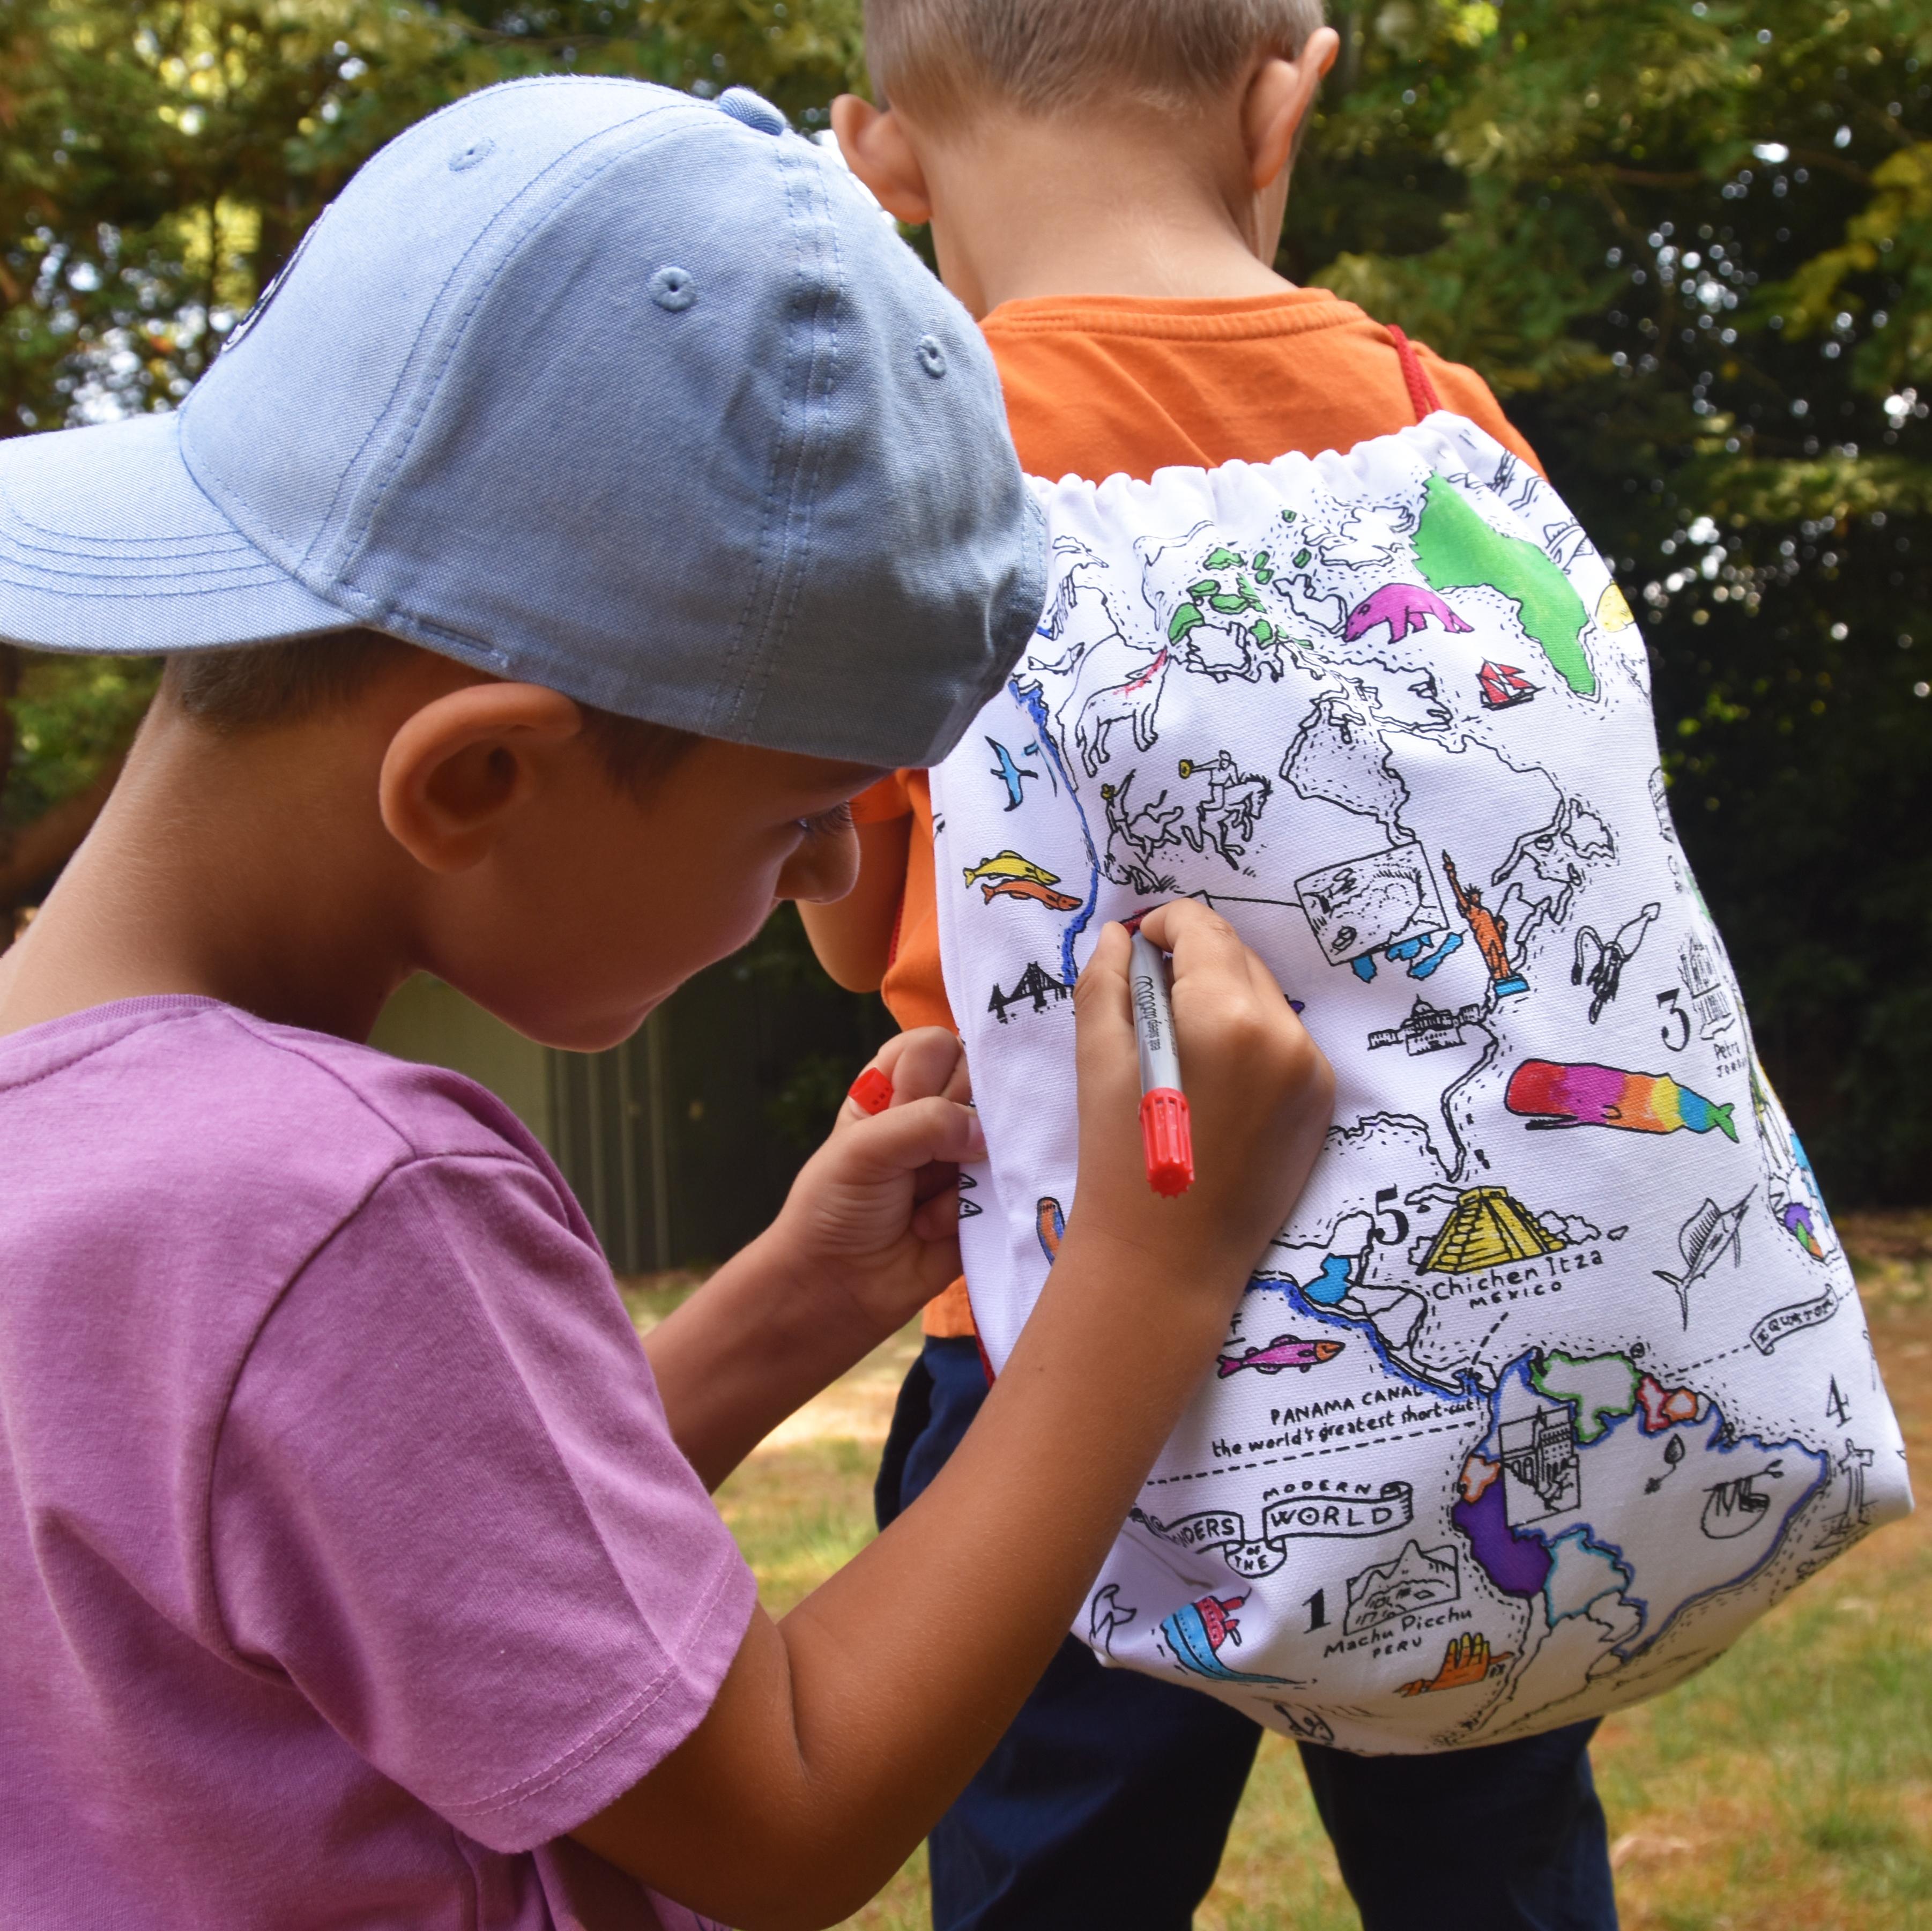 Children colouring in the world map bag while another is wearing it